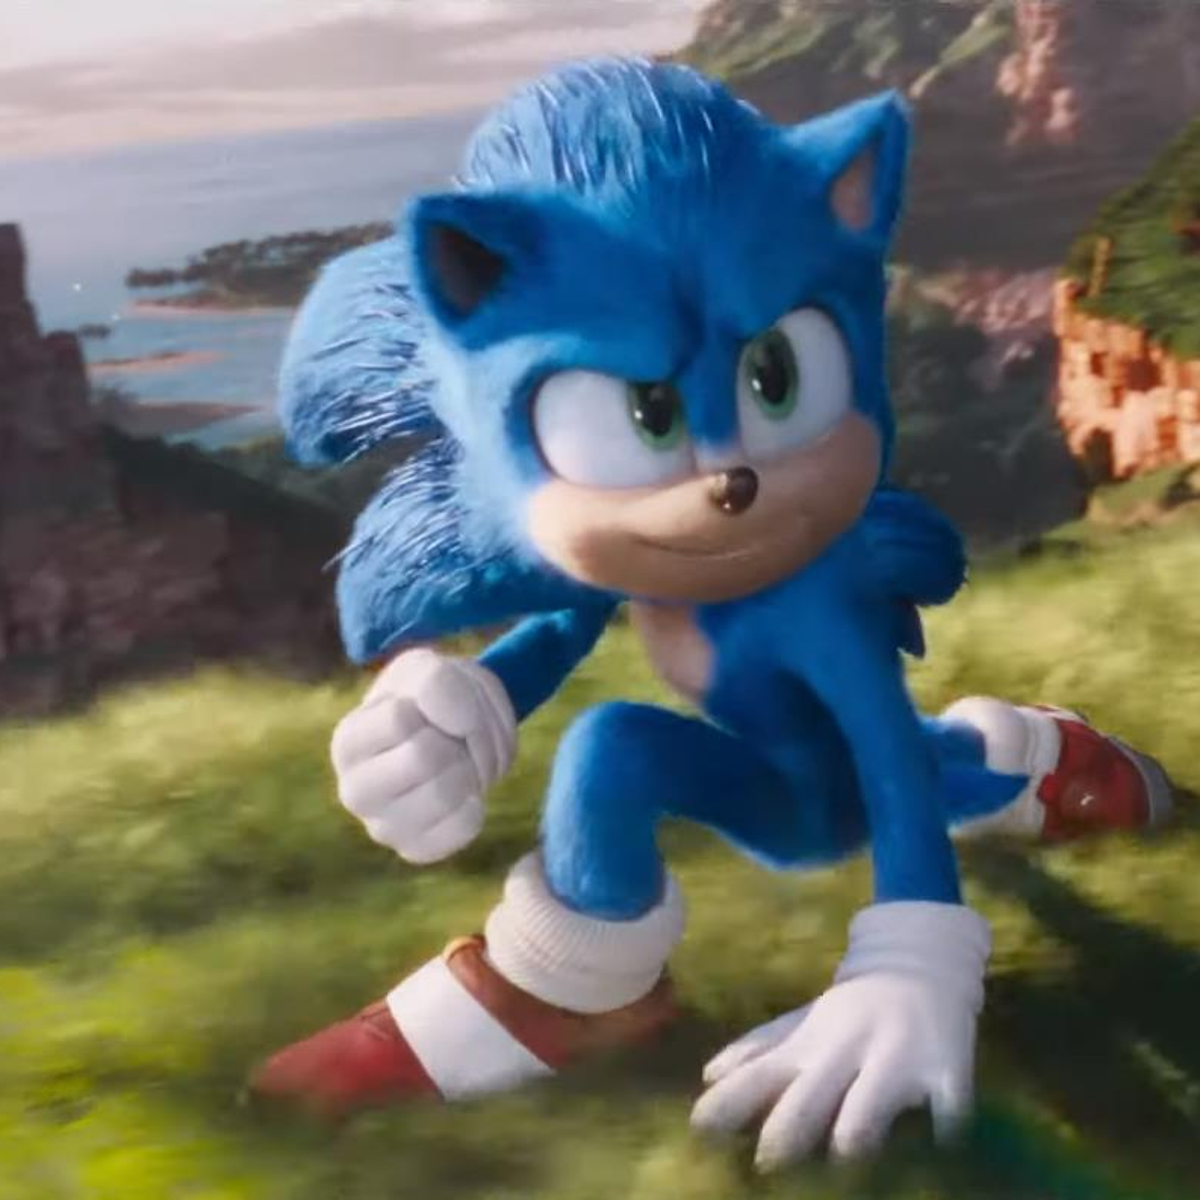 https://assetsio.reedpopcdn.com/sonic_the_hedgehog-_new_design_movie_grab_2.jpg?width=1200&height=1200&fit=crop&quality=100&format=png&enable=upscale&auto=webp